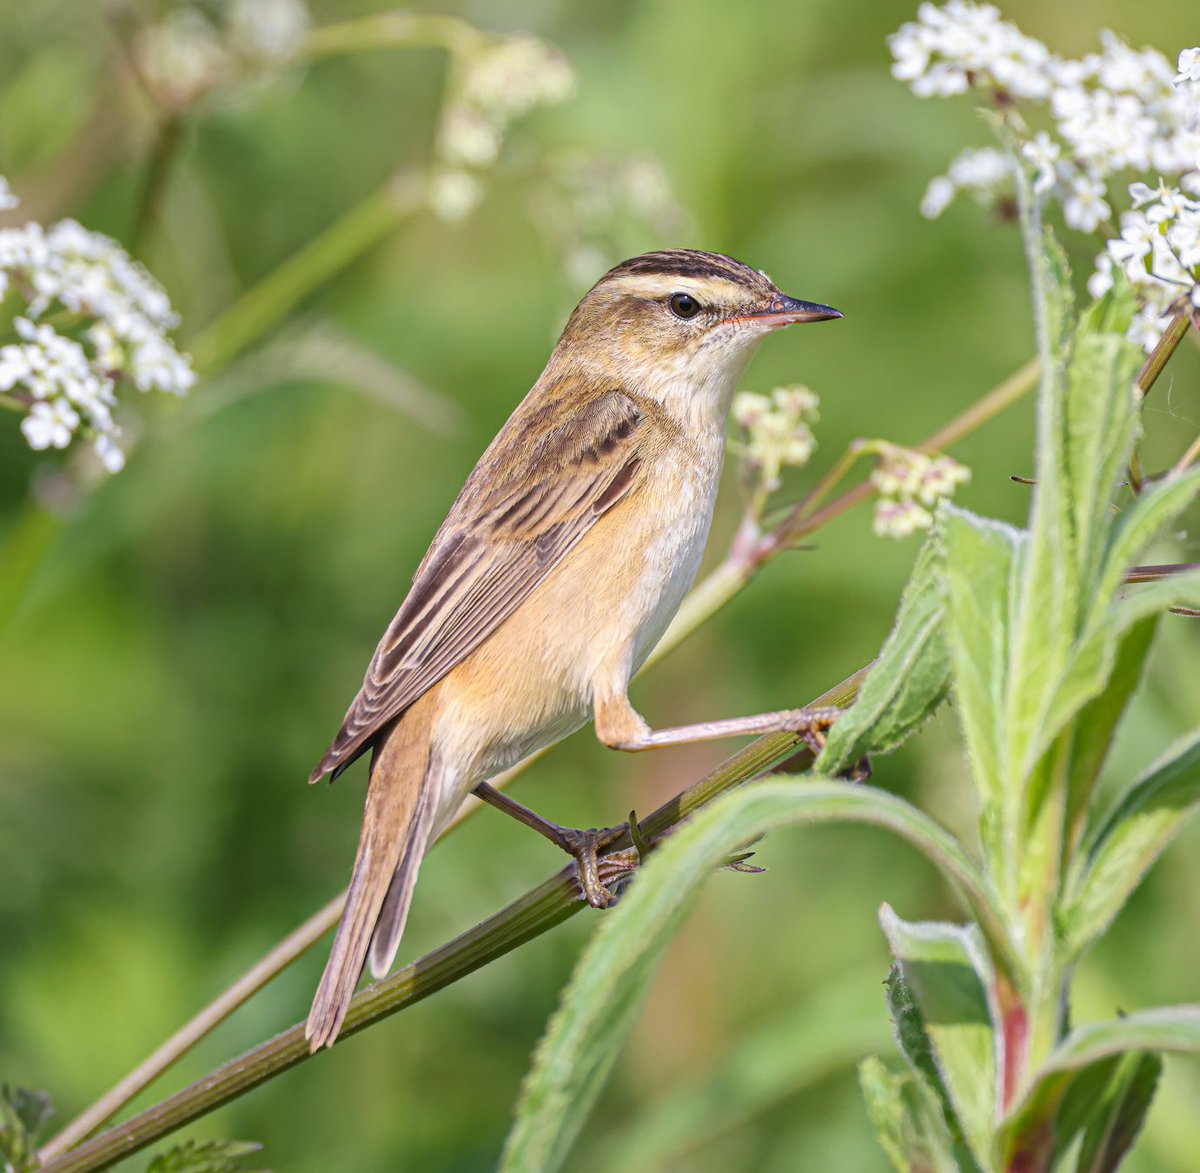 Tonight’s thread latest shots I’m going to start by sharing my first Sedge Warbler in over 3 years this morning